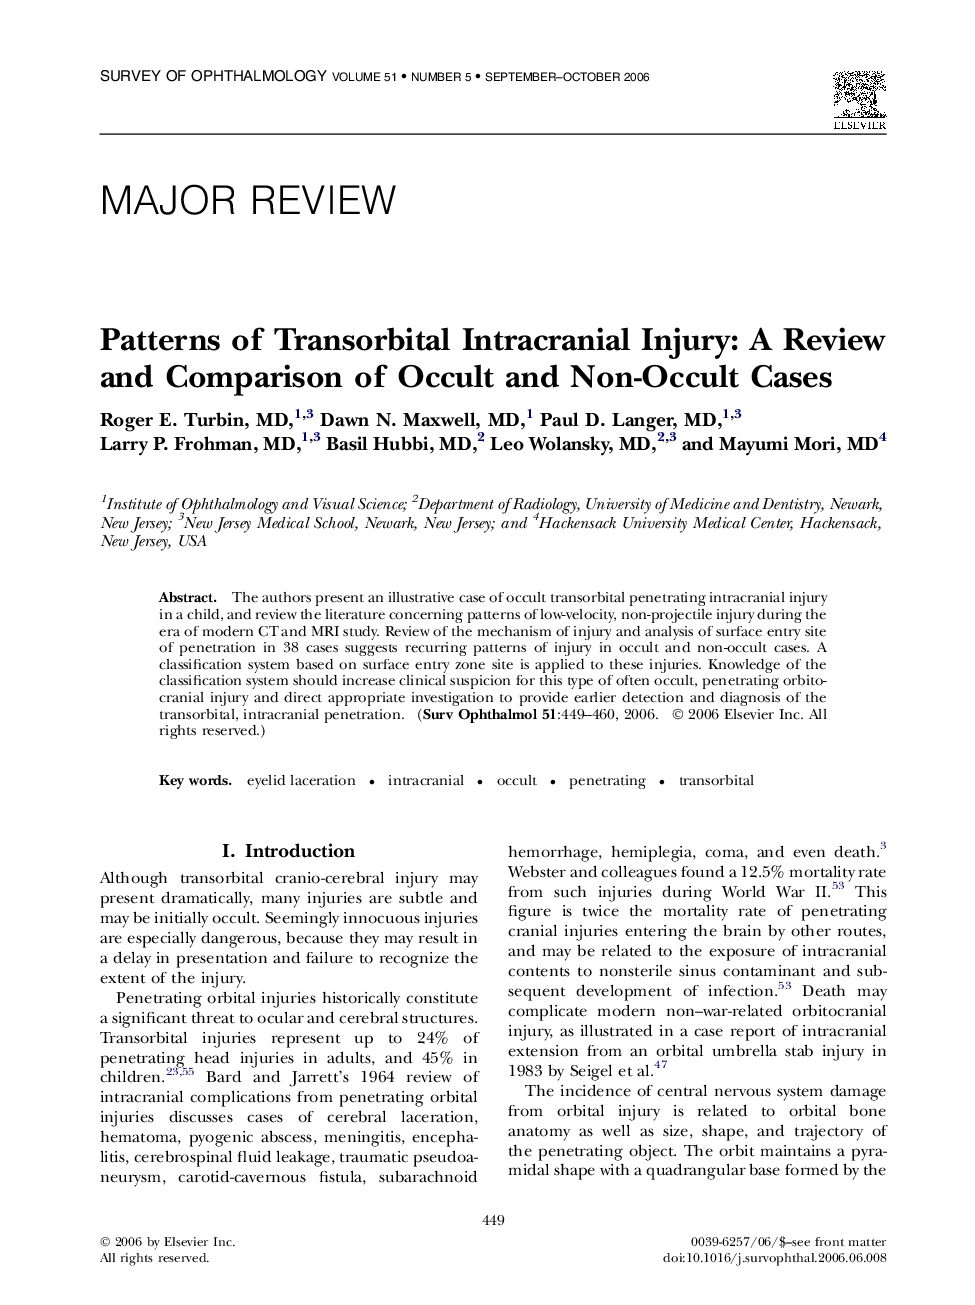 Patterns of Transorbital Intracranial Injury: A Review and Comparison of Occult and Non-Occult Cases